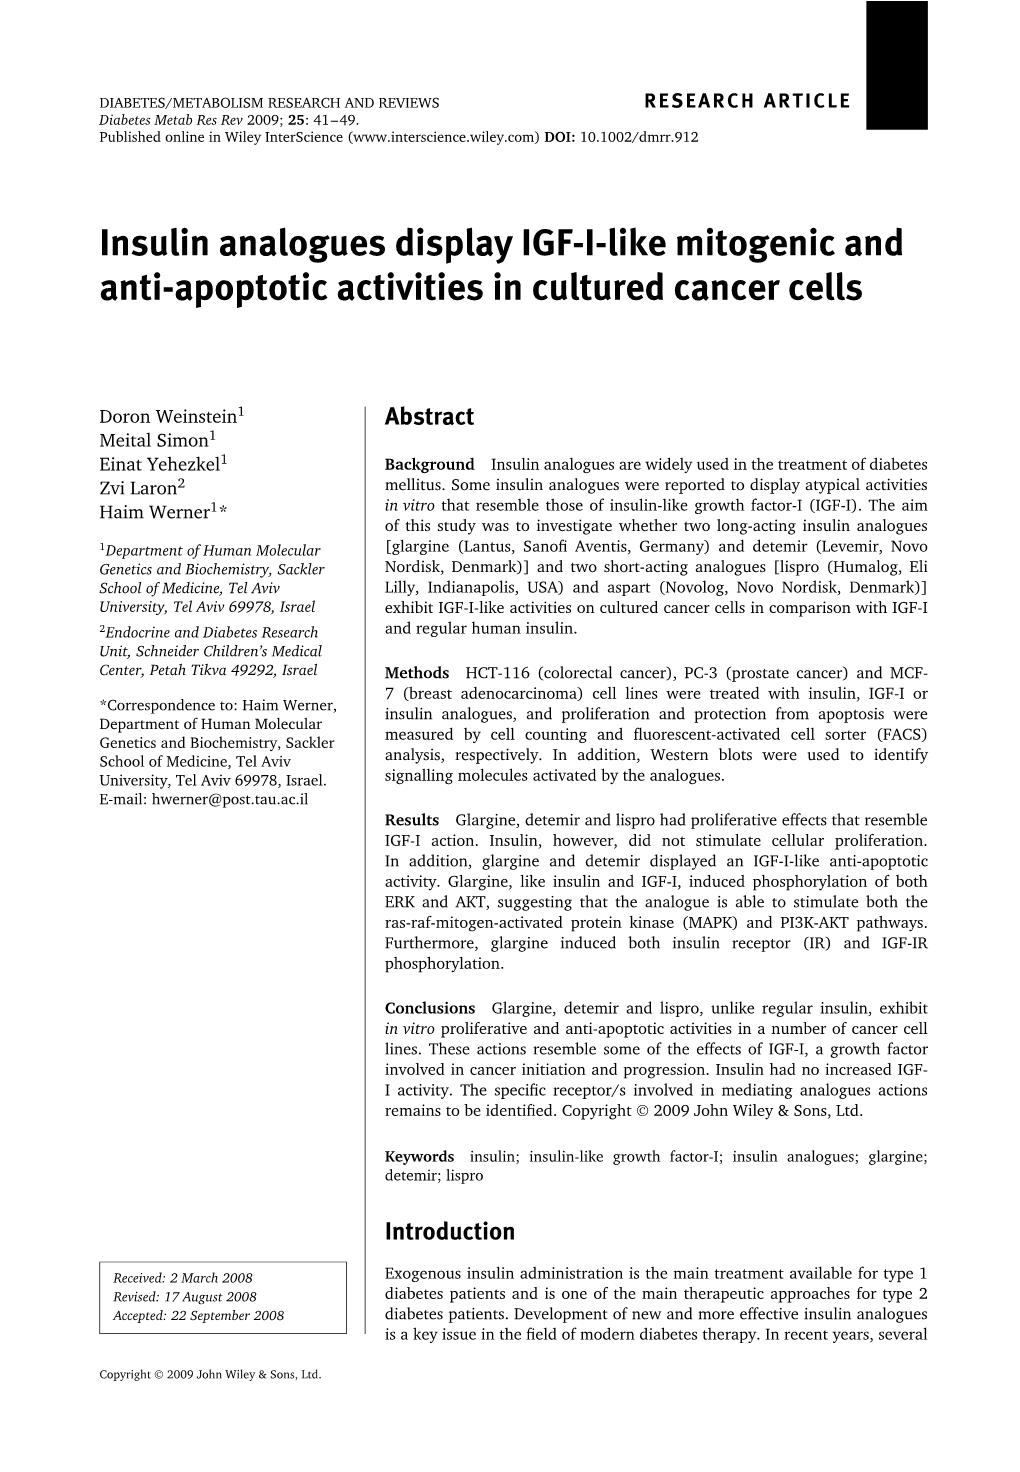 Insulin Analogues Display IGF-I-Like Mitogenic and Anti-Apoptotic Activities in Cultured Cancer Cells